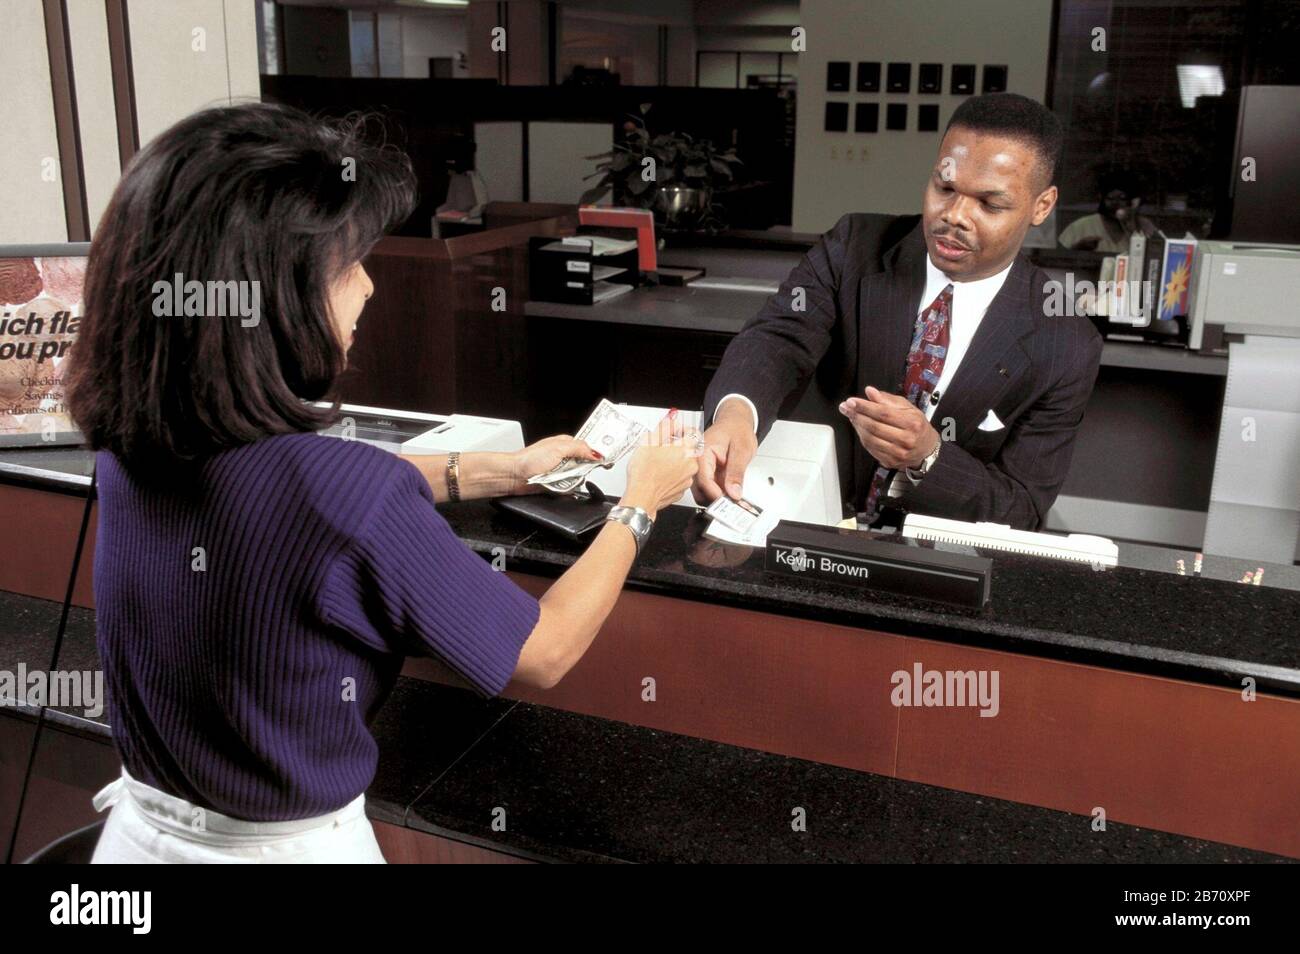  A bank teller wearing a suit and tie is talking to a customer while sitting at a desk in a bank.